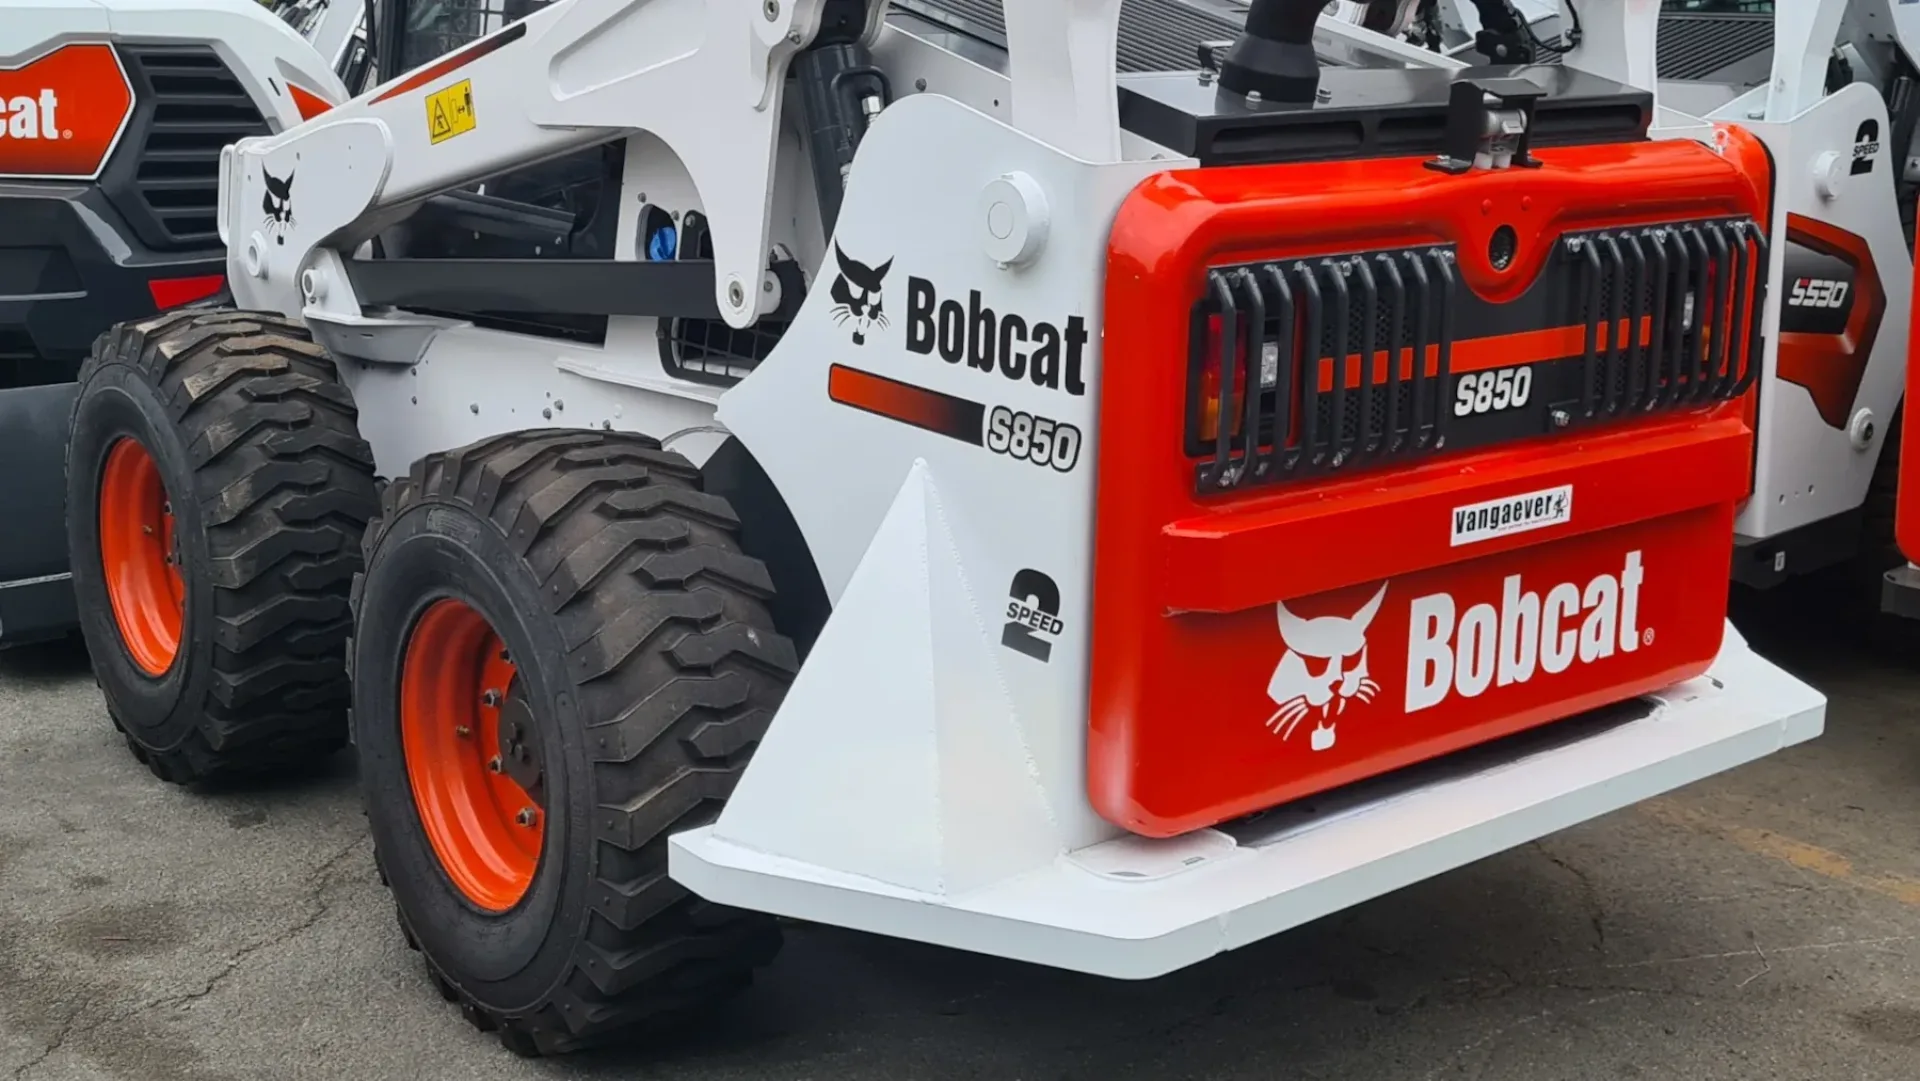 Over ons Bobcat s850 shiptrimming